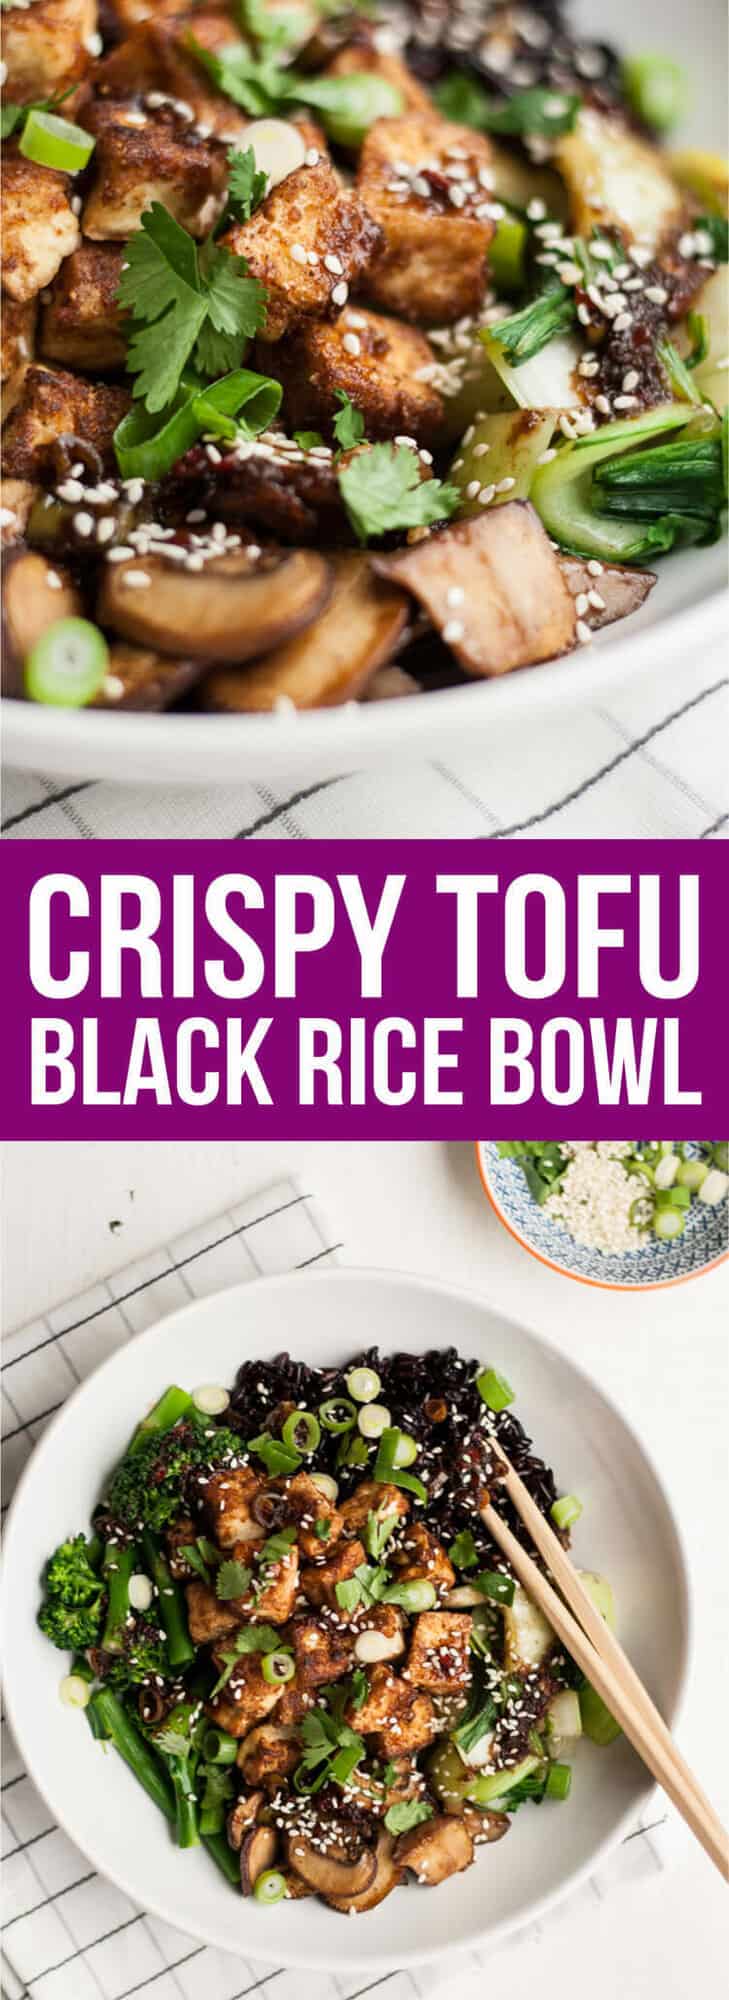 Crispy Tofu Black Rice Bowl - this vegan recipe is infused with Asian flavours, is quick and easy to make and is loaded with crispy, flavoursome tofu | eatloveeats.com